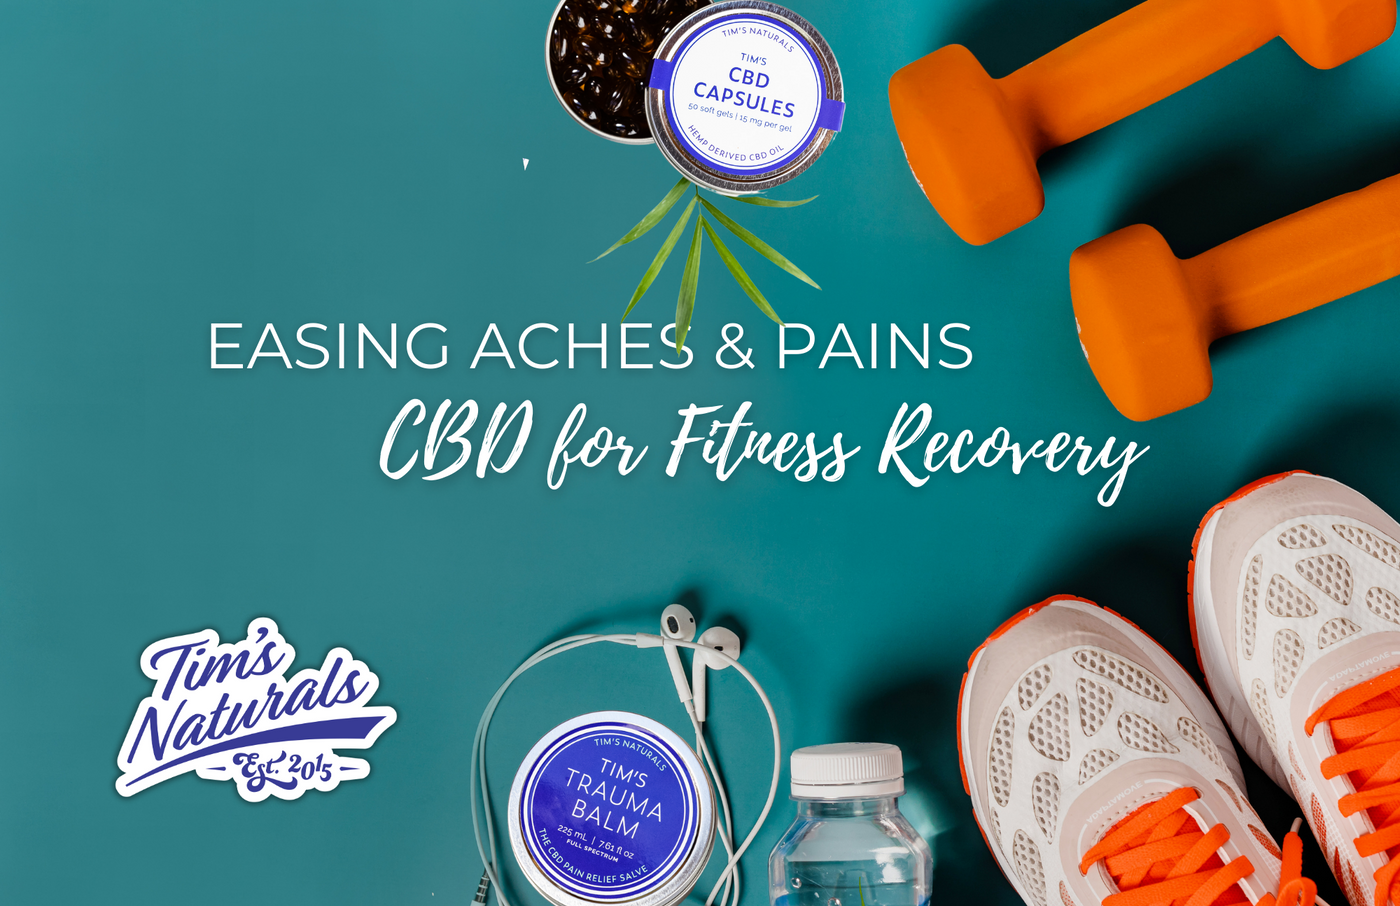 Easing Aches and Pains: CBD for Fitness Recovery with Tim's Naturals